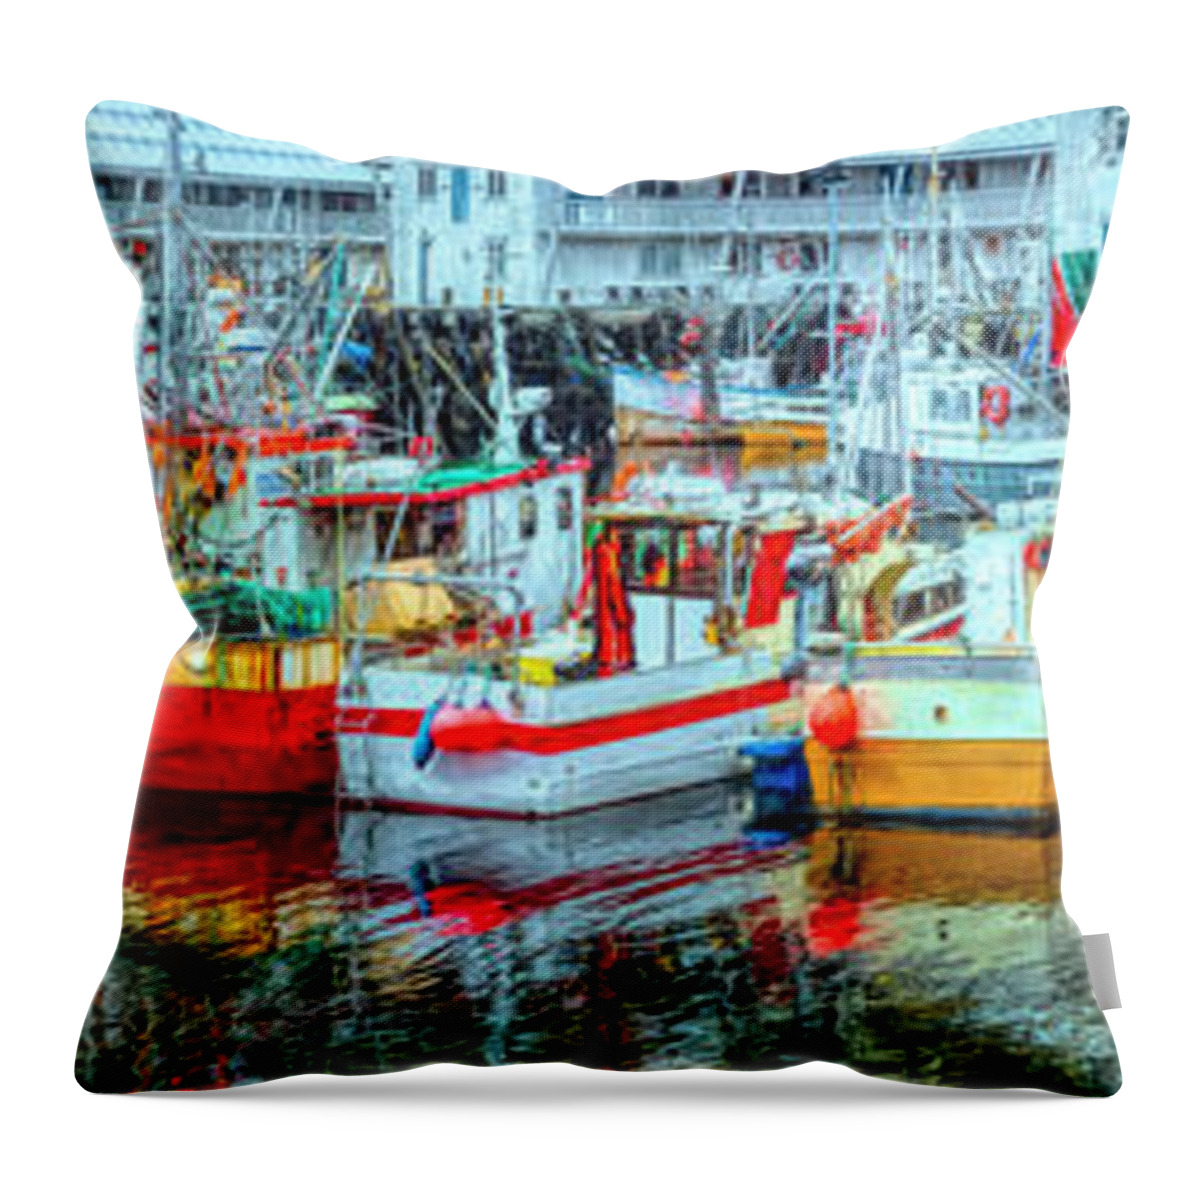 Boats Throw Pillow featuring the photograph Line Up of Fishing Boats by Debra and Dave Vanderlaan